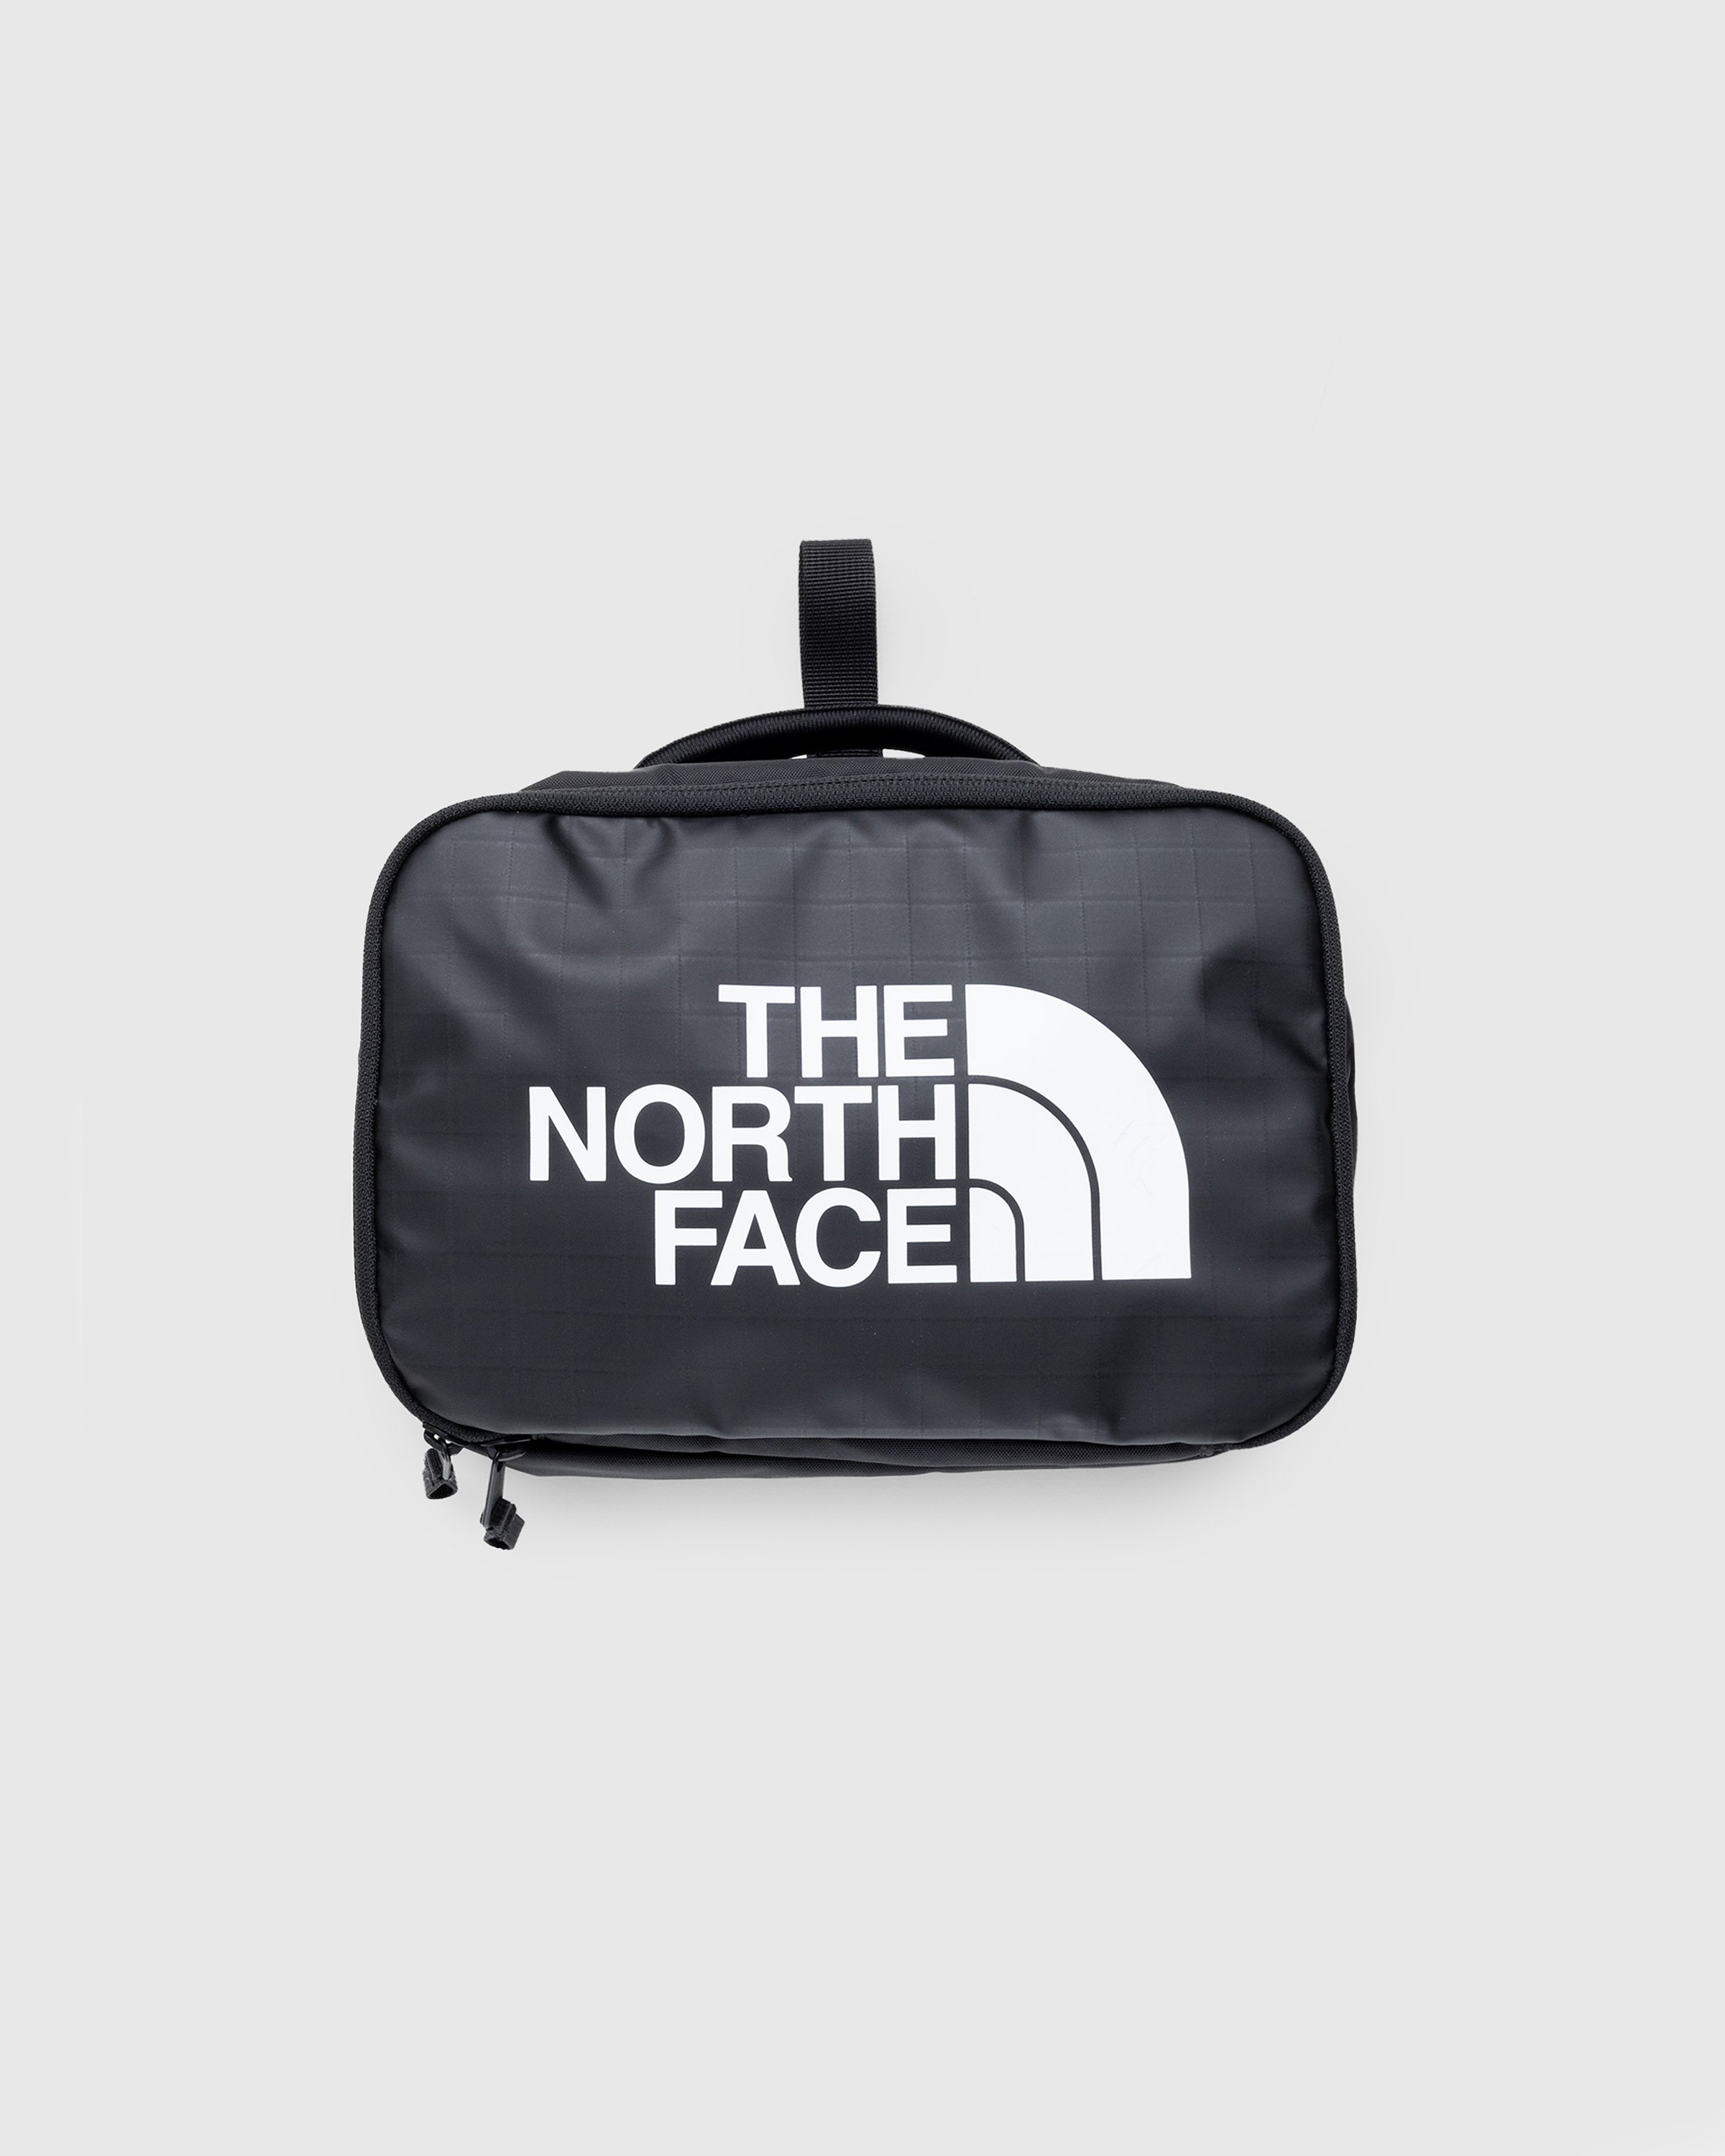 The North Face - Base Camp Voyager Toiletry Kit Black - Accessories - Black - Image 1